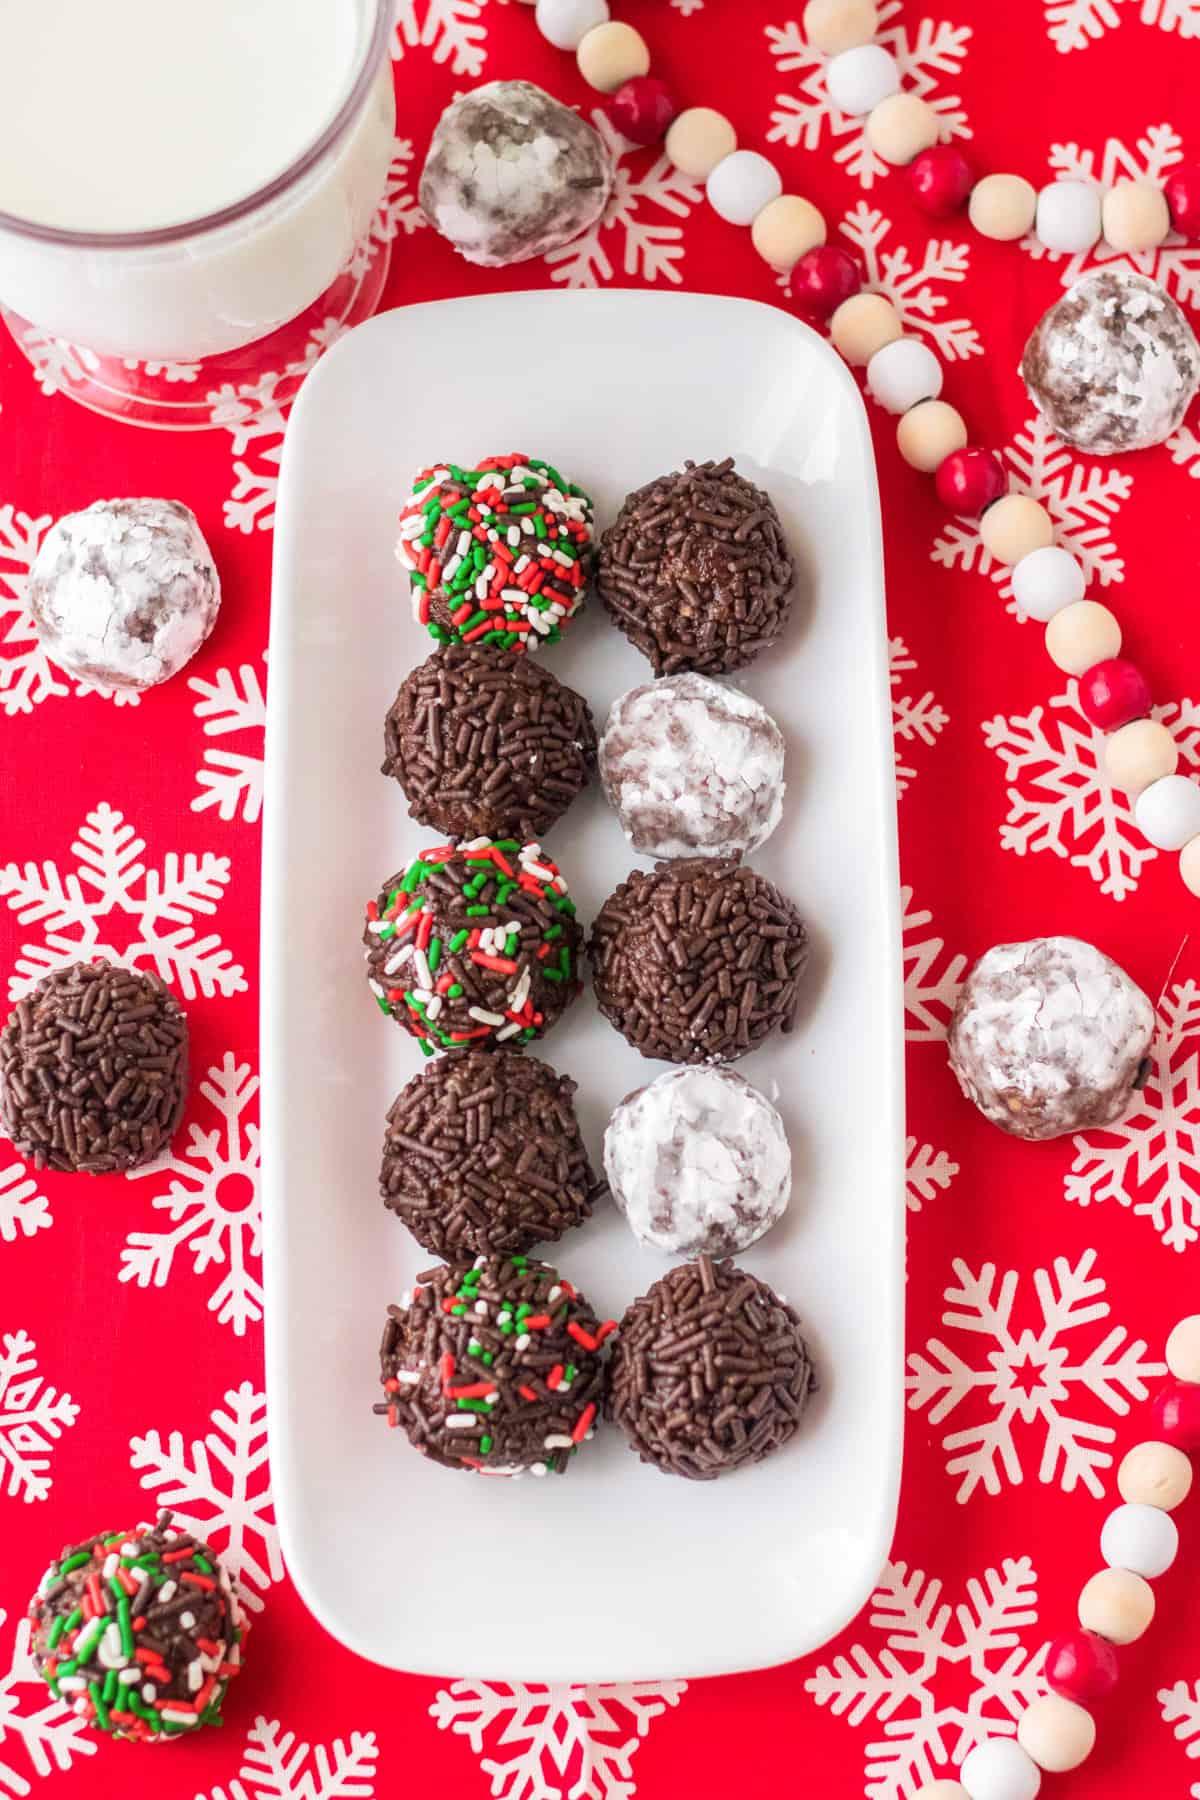 Tray of Christmas rum balls with glass of milk.